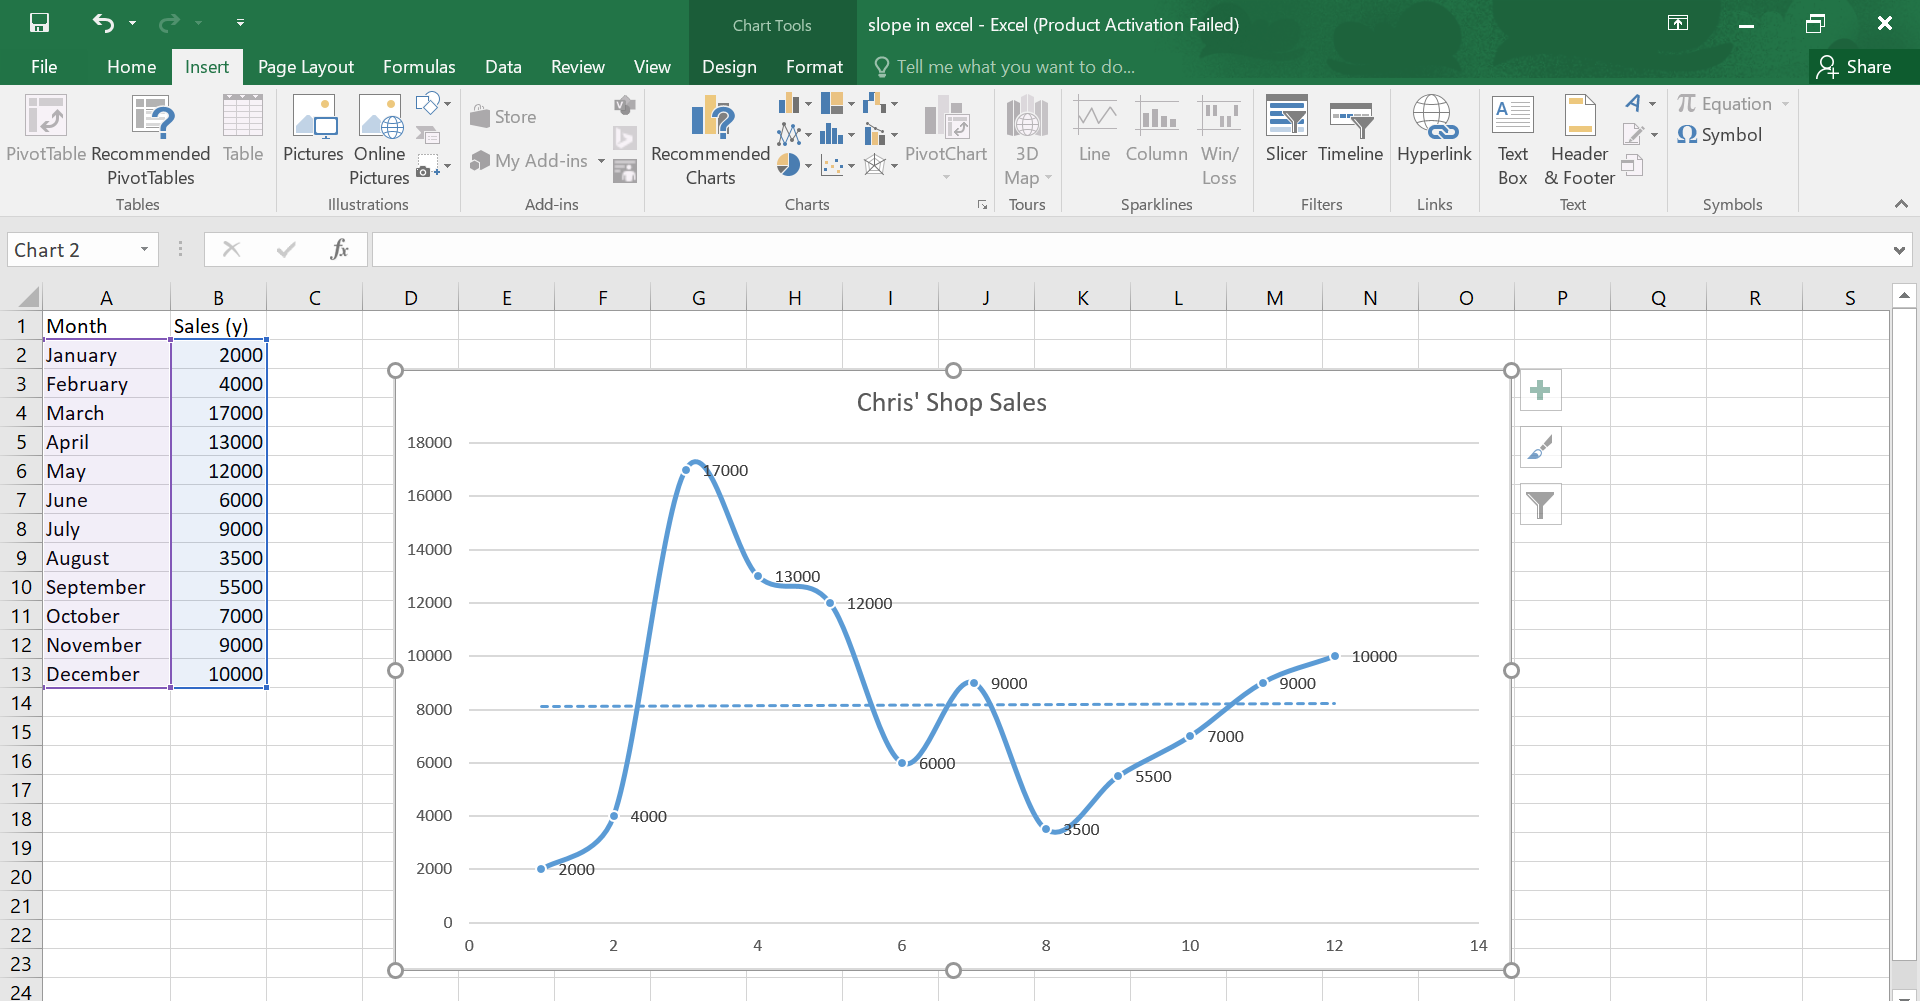 how to plot a graph in excel using an equation